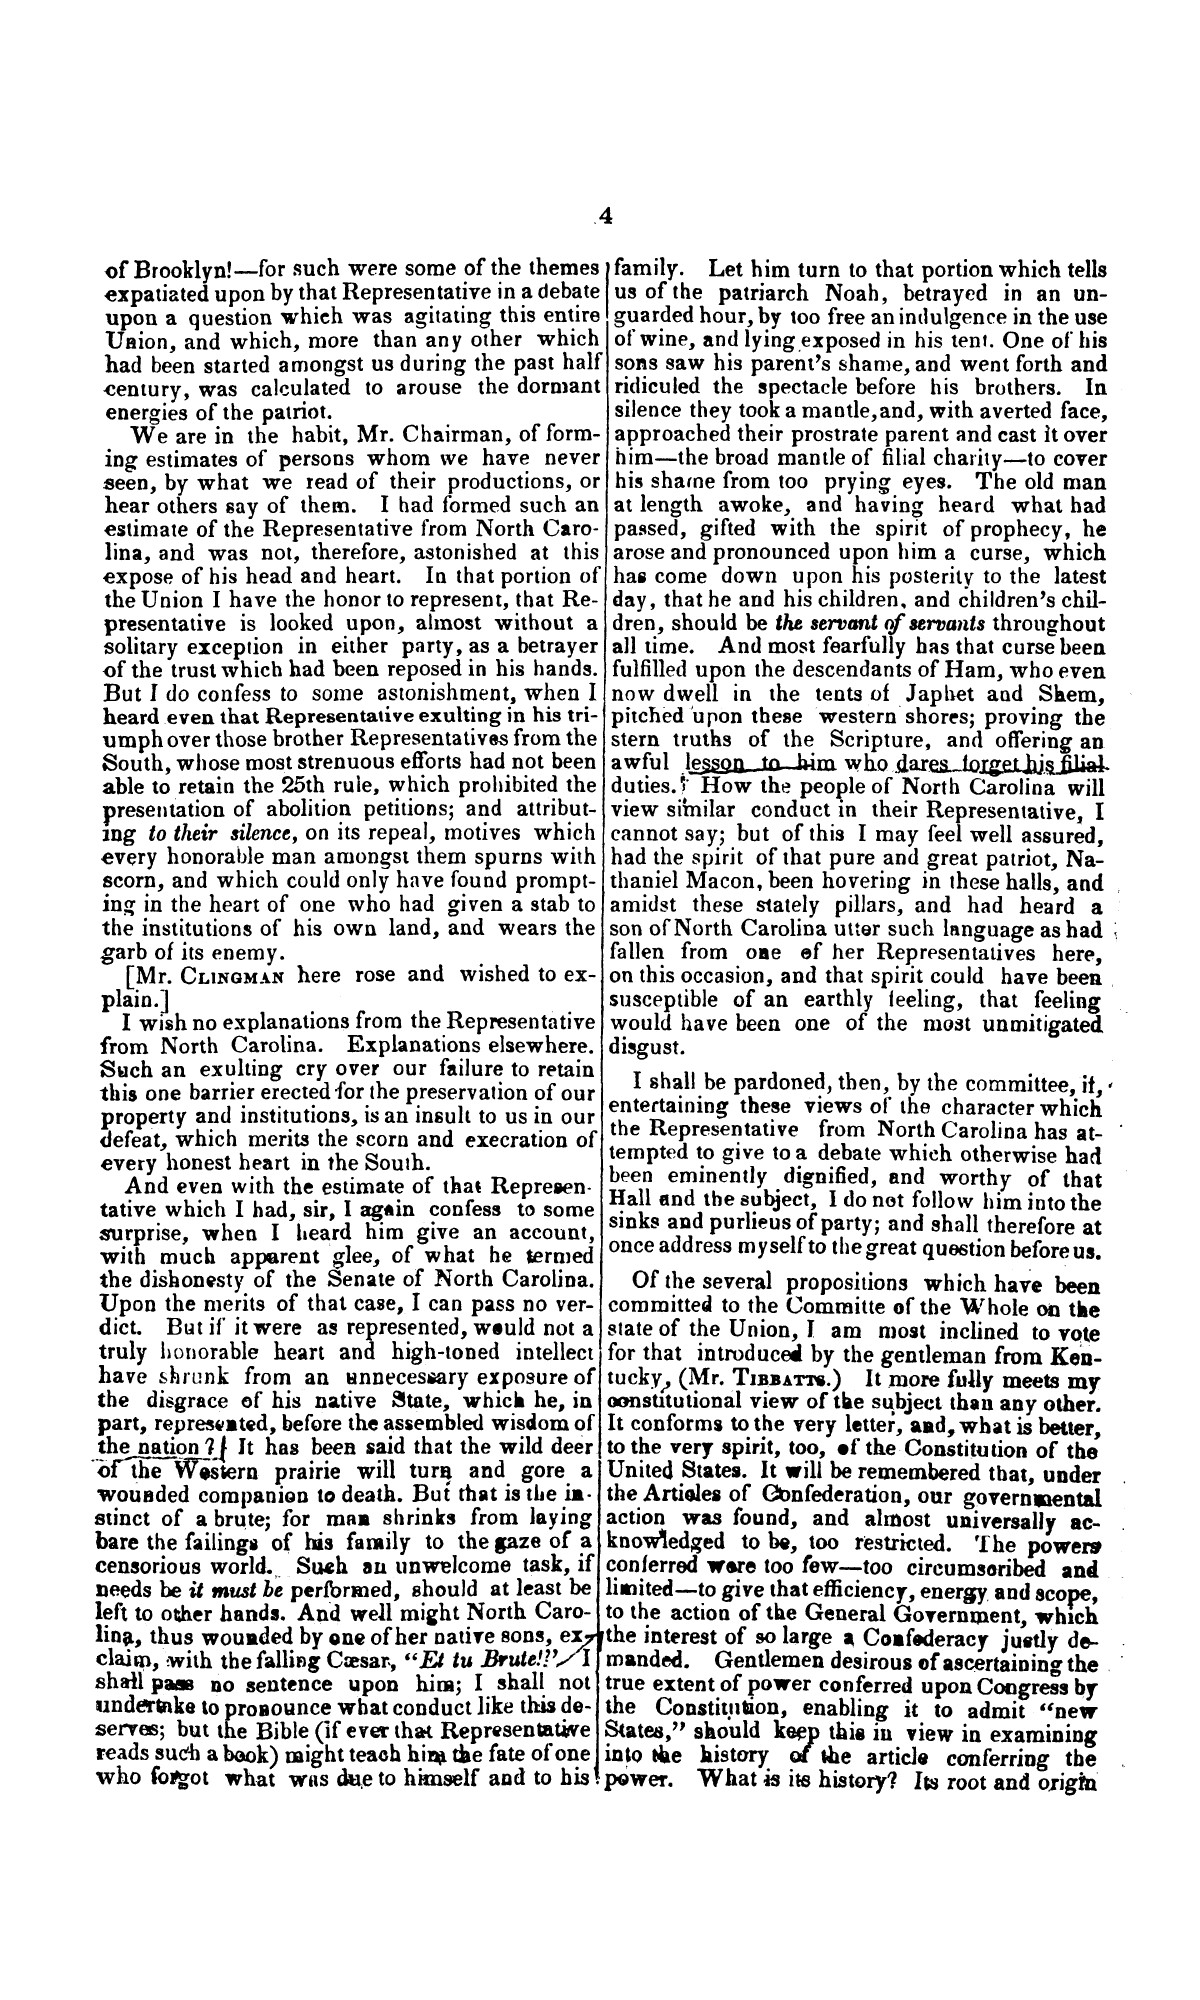 Speech of Hon. Wm. Lowndes Yancey, of Alabama, on the annexation of Texas to the United States, delivered in the House of Representatives, Jan. 7, 1845.
                                                
                                                    [Sequence #]: 4 of 14
                                                